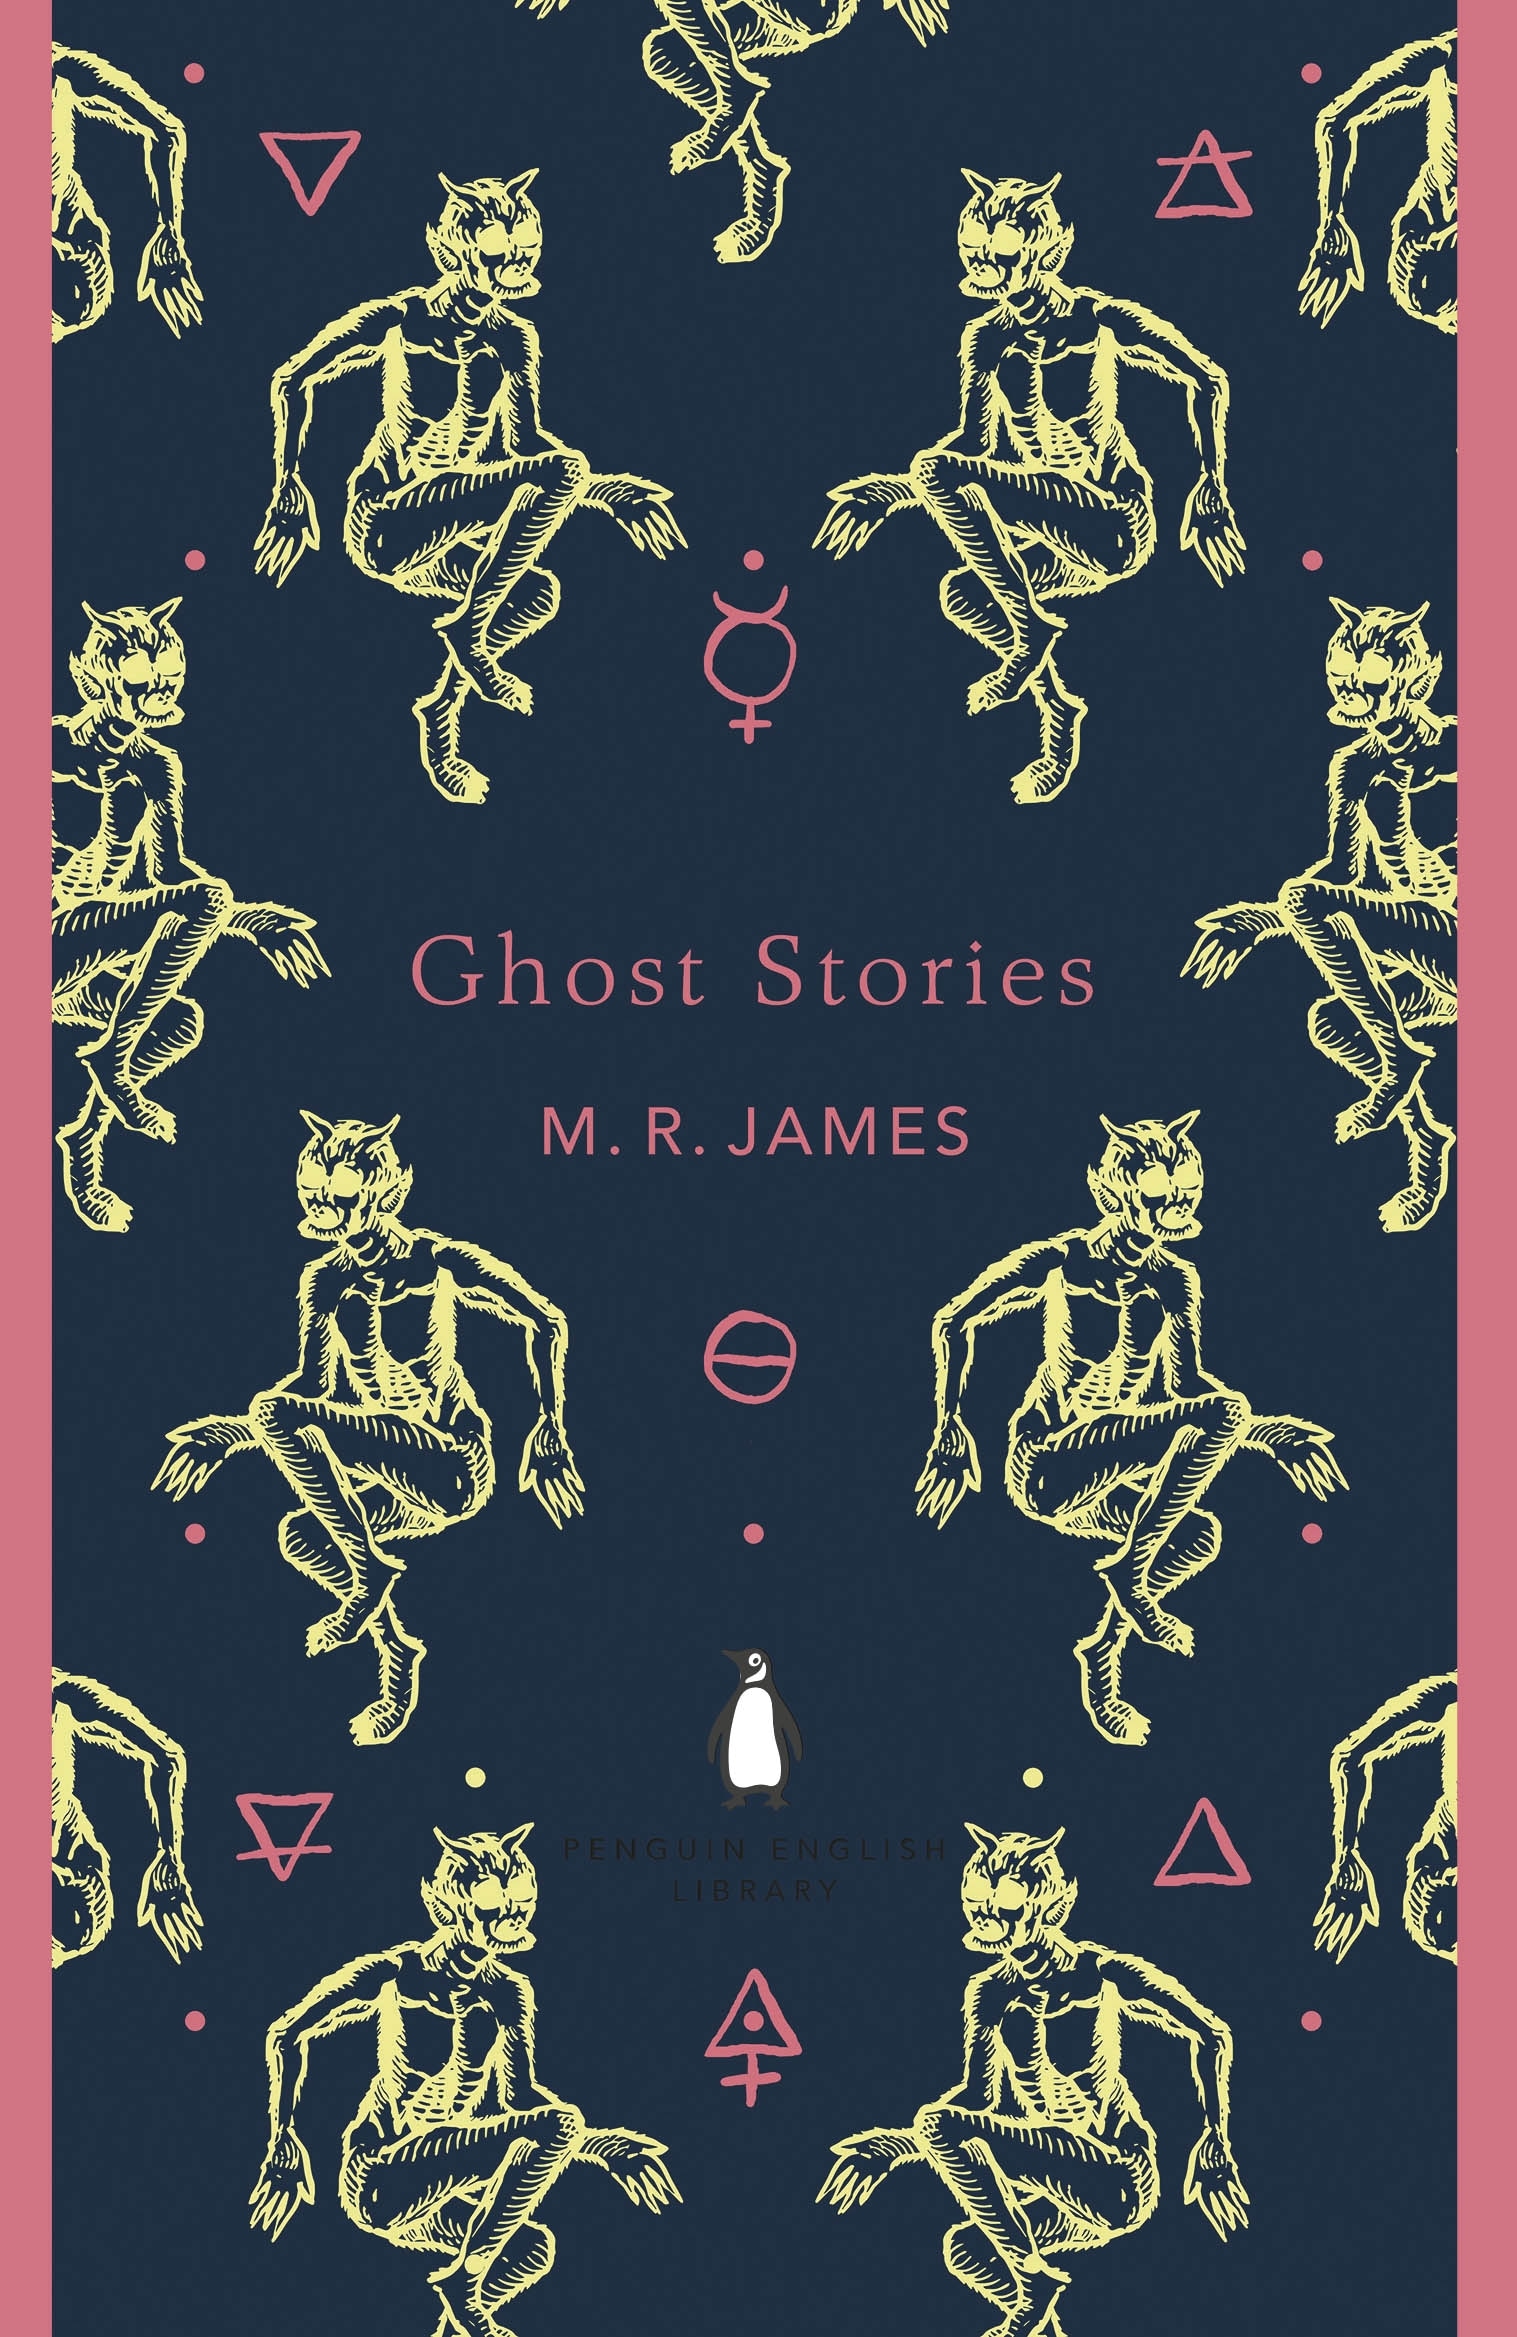 Book “Ghost Stories” by M. R. James — June 7, 2018